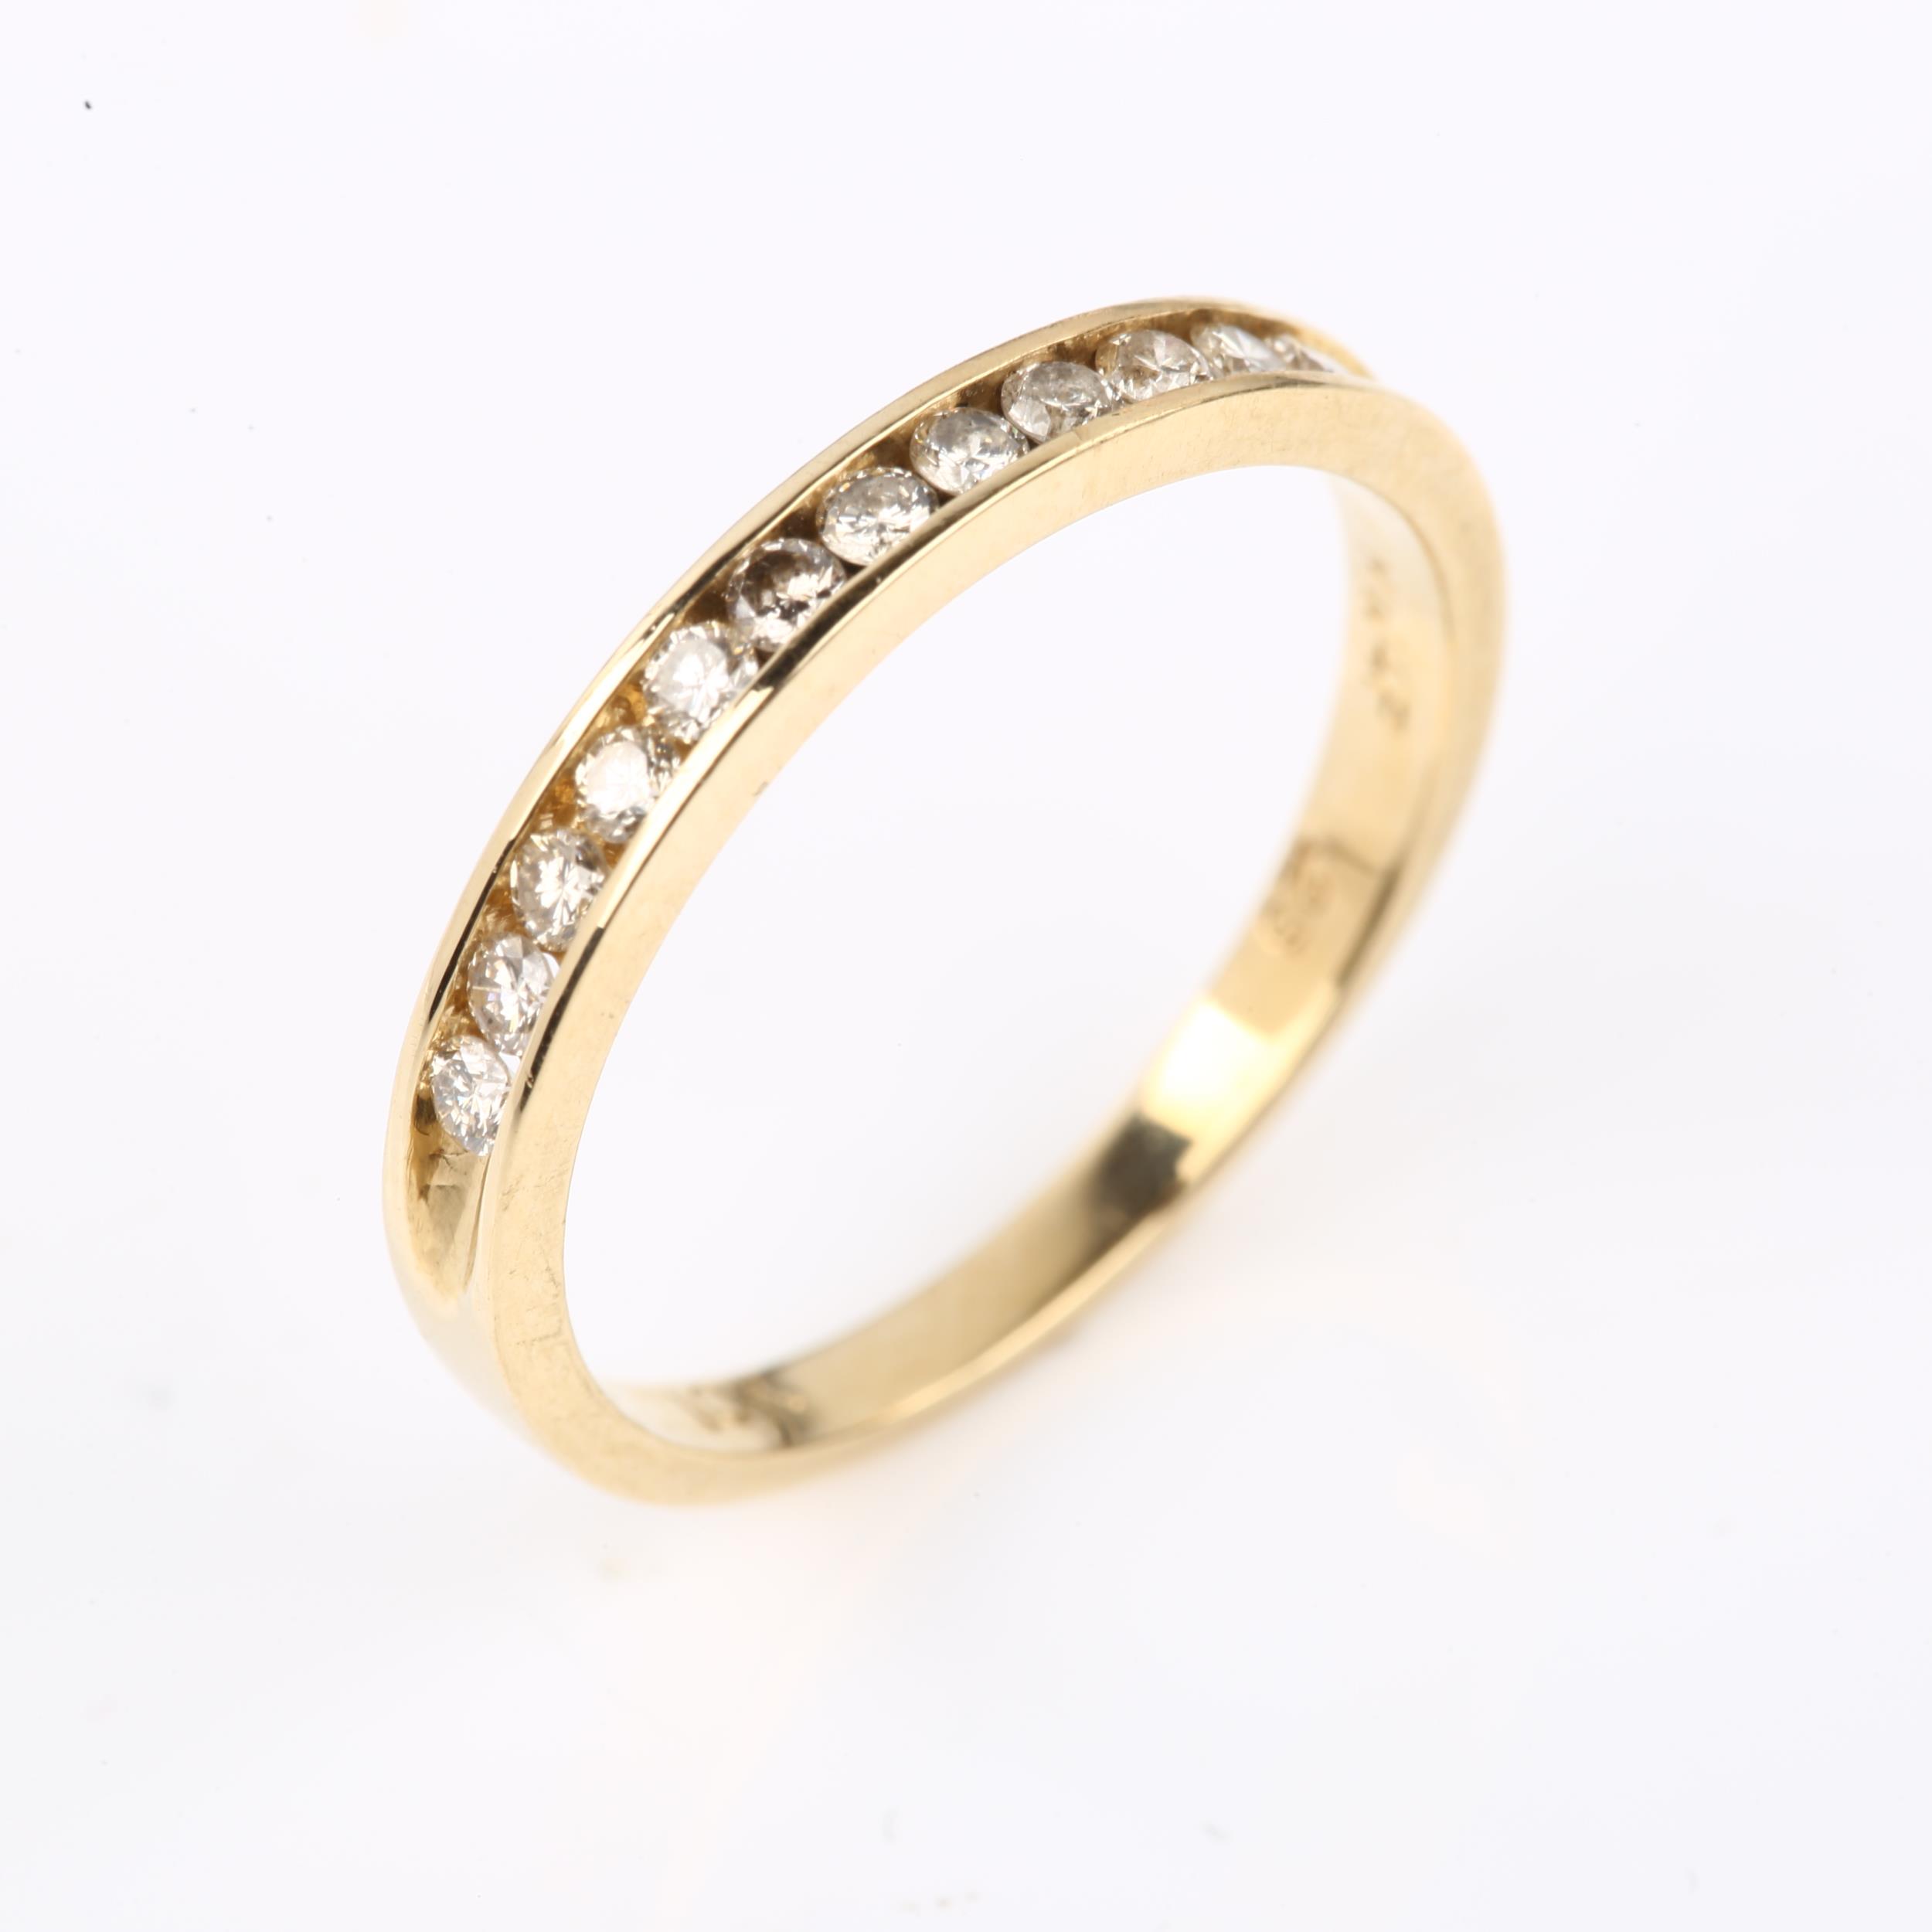 A modern 9ct gold diamond half eternity ring, channel set with modern round brilliant-cut - Image 2 of 4